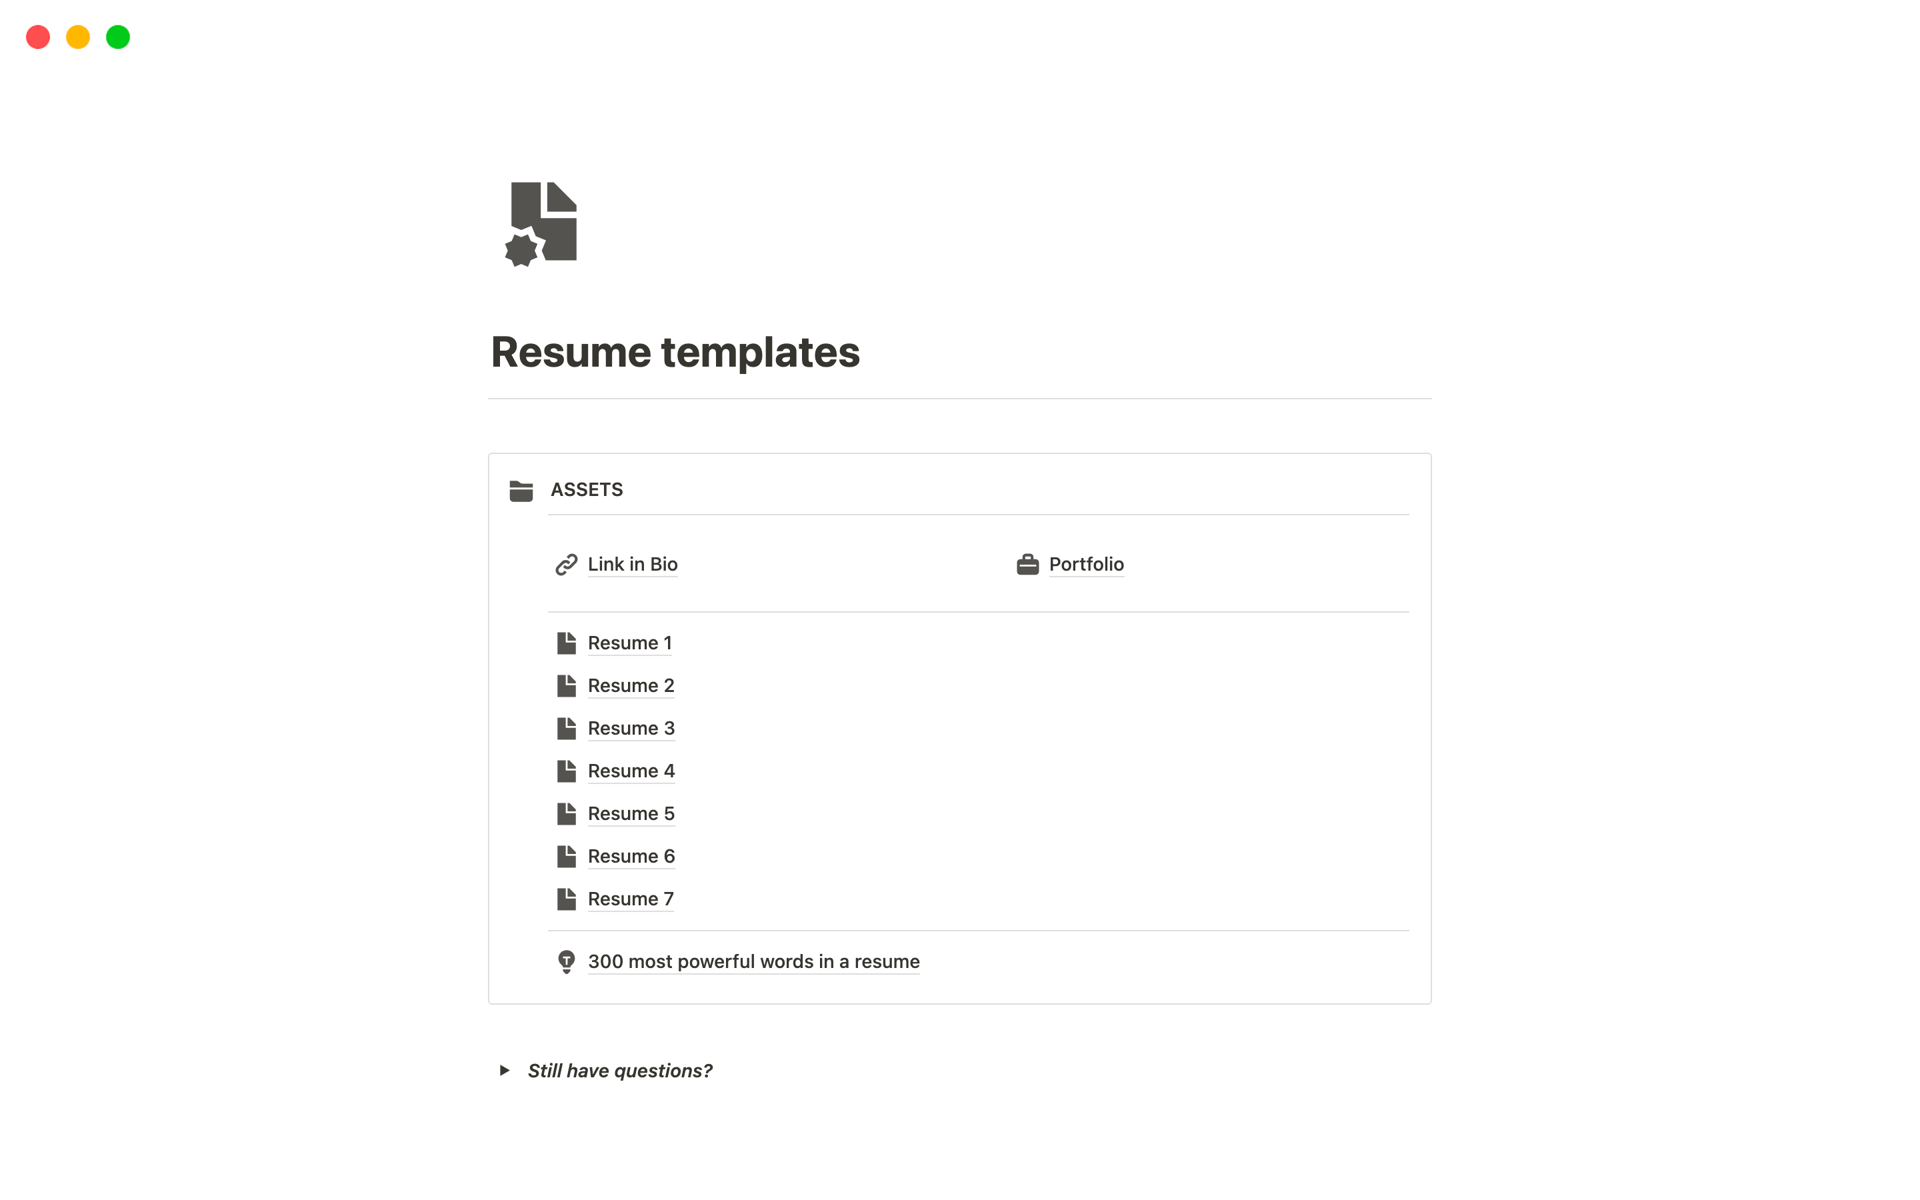 A versatile collection of resume templates and expert tips offered by "Notion Resume Templates" to create compelling and customized resumes for job seekers.